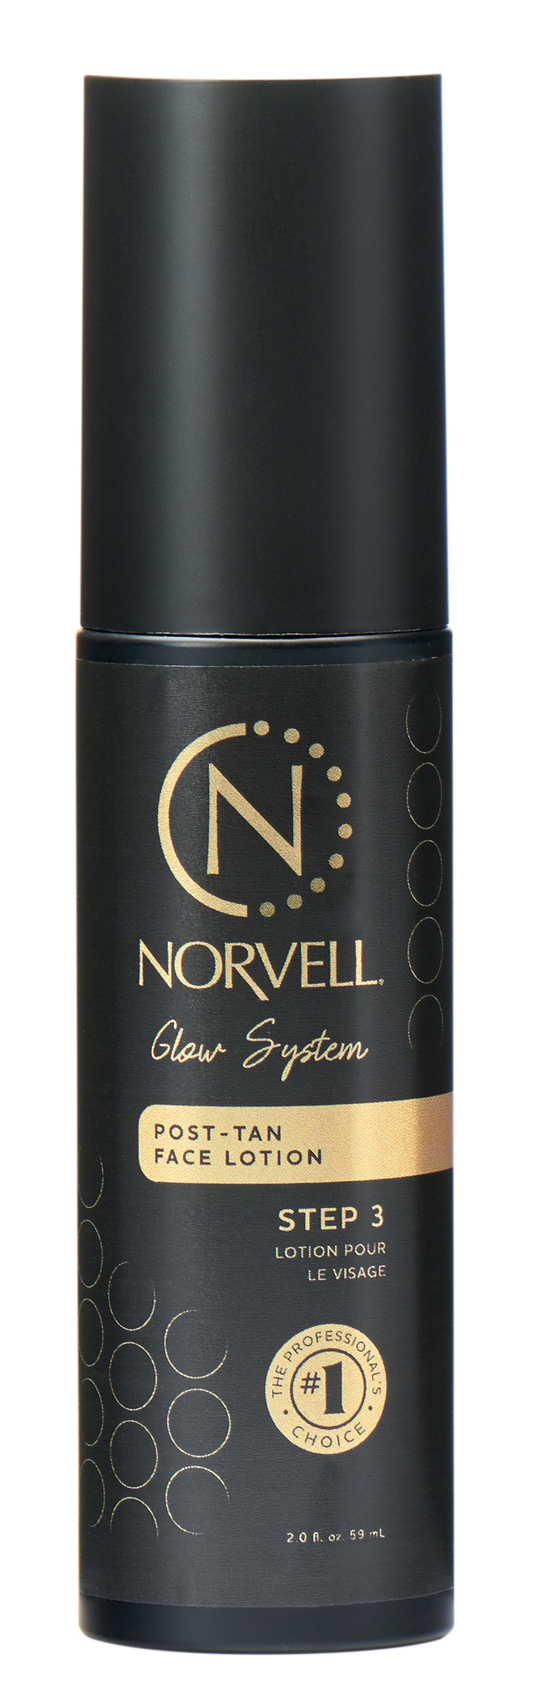 2 oz. bottle of norvell post tan face lotion